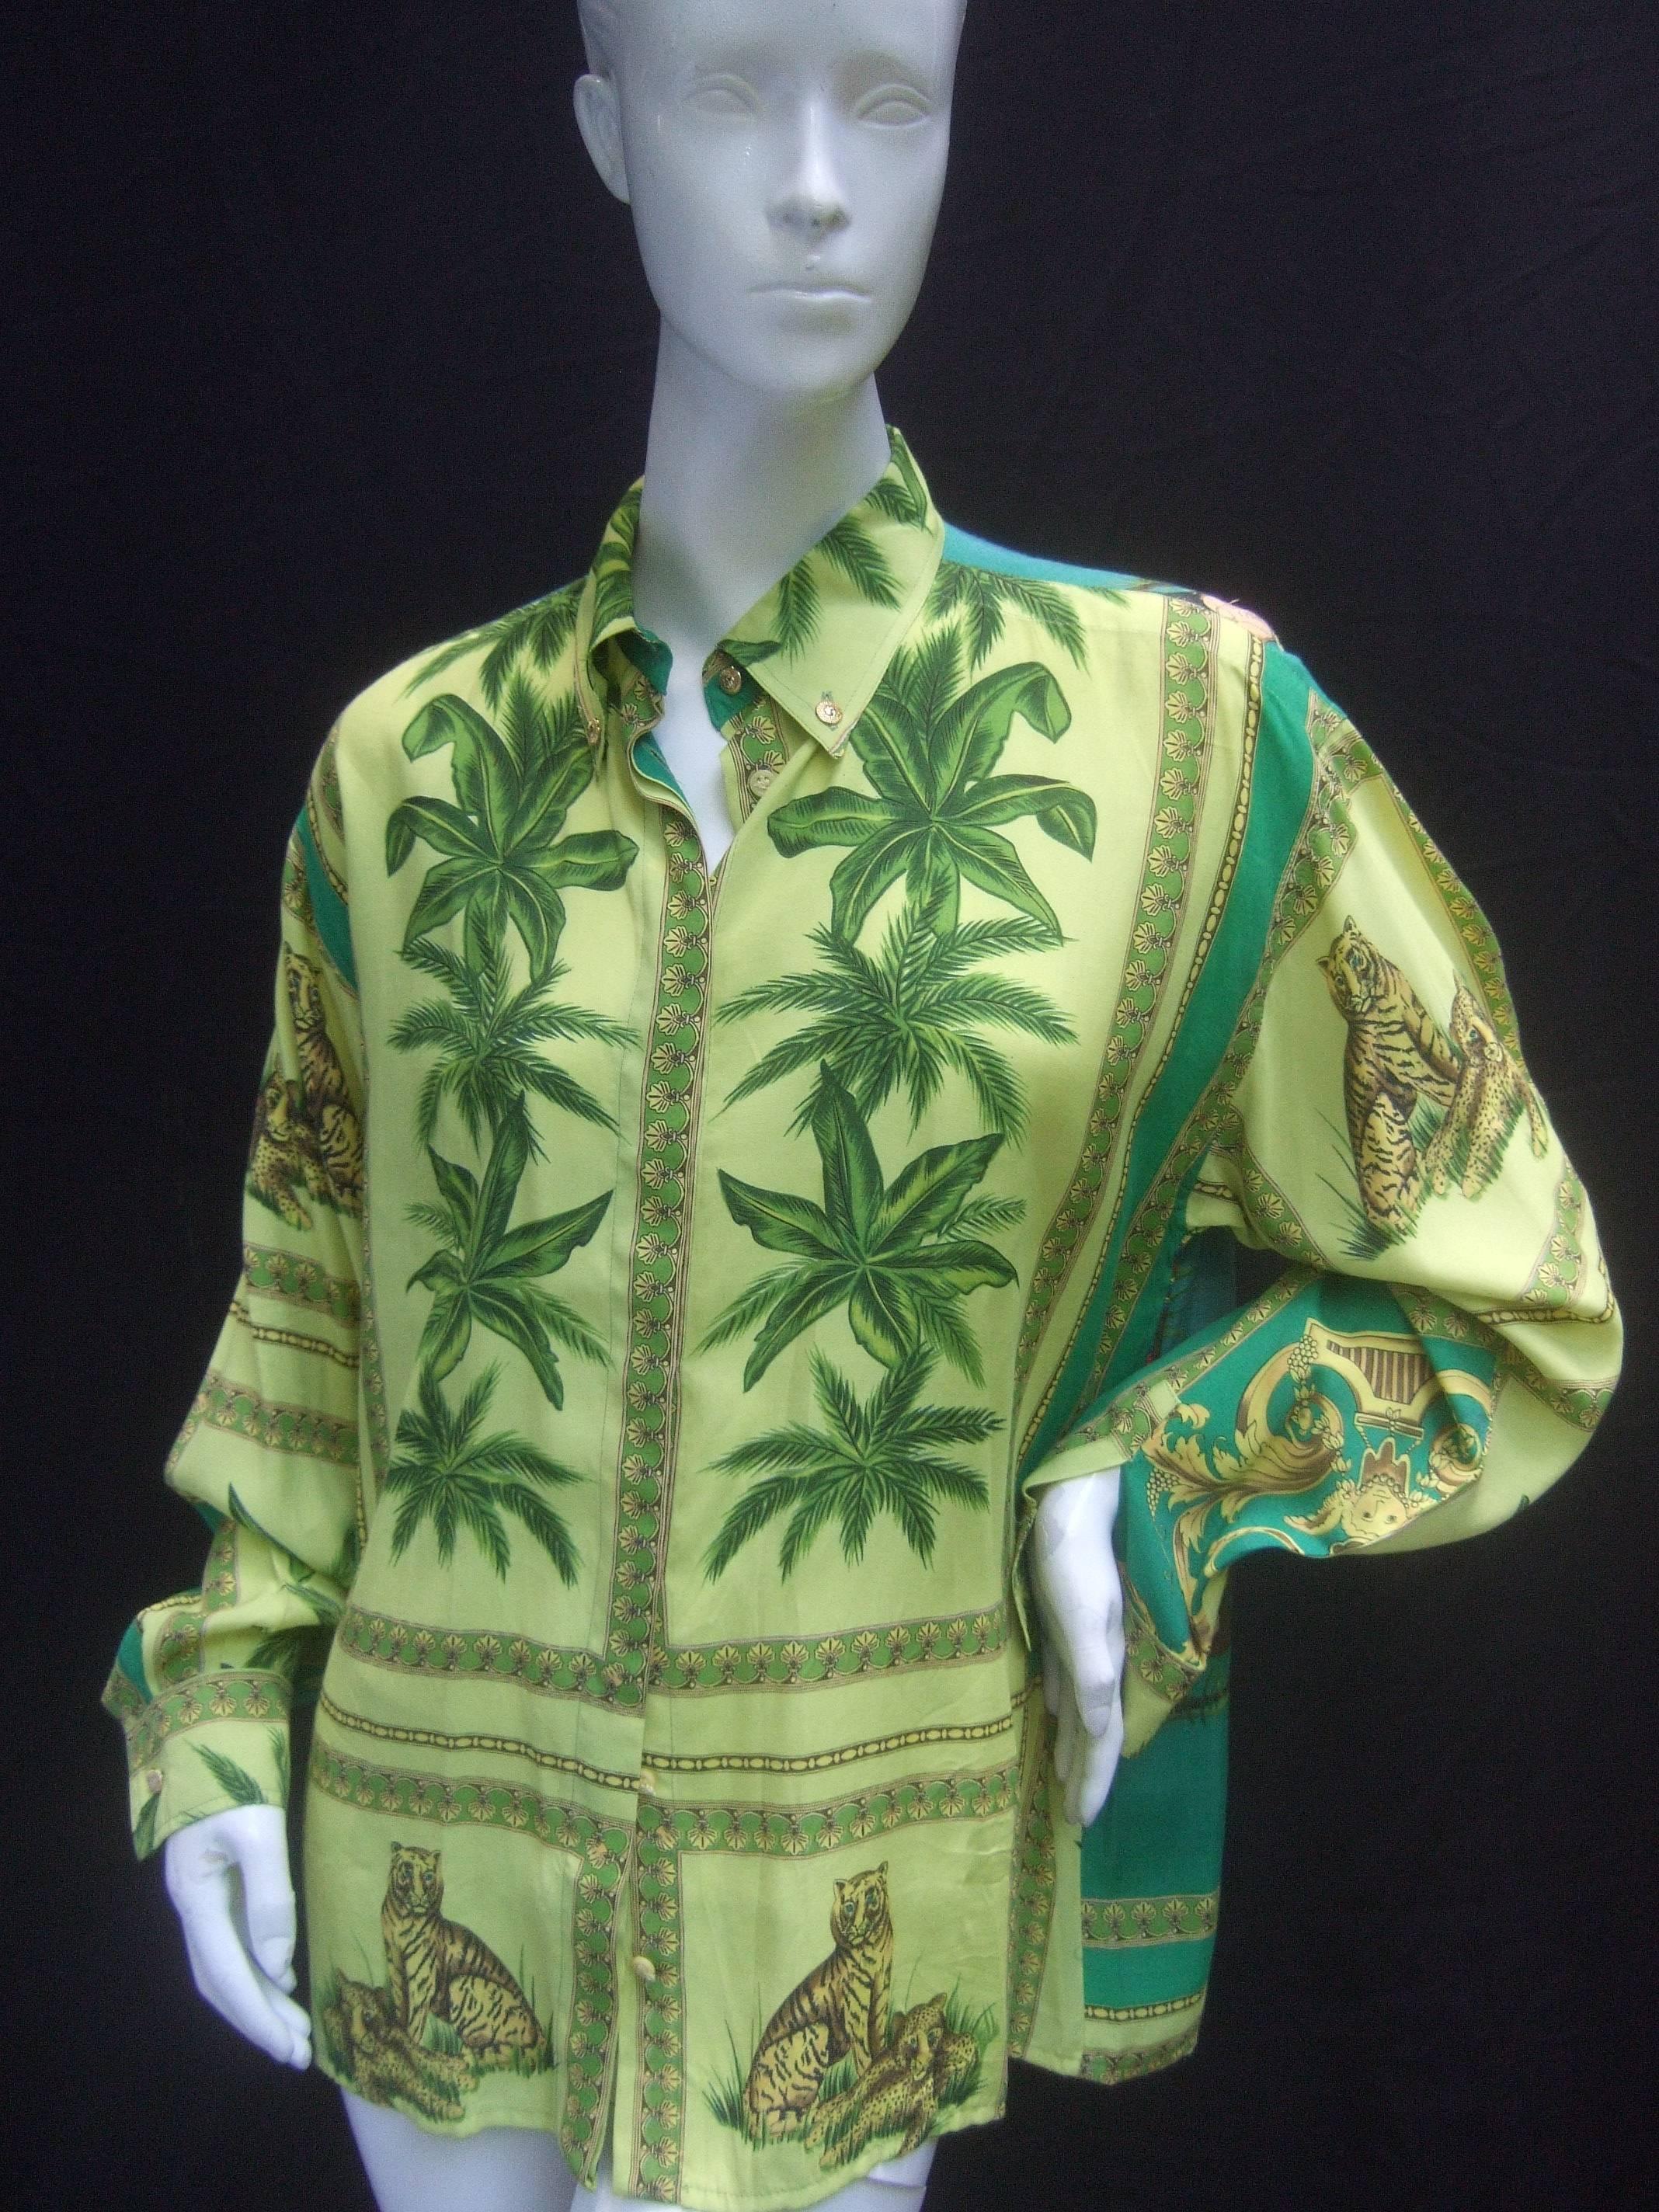 Versace Tropical jungle print tarzan blouse ca 1990s
The exotic print blouse is illustrated with lions
and leopards surrounded by lush tropical foliage 

Swinging thru the palm trees is a loin cloth tarzan
figure. He is accompanied by a female